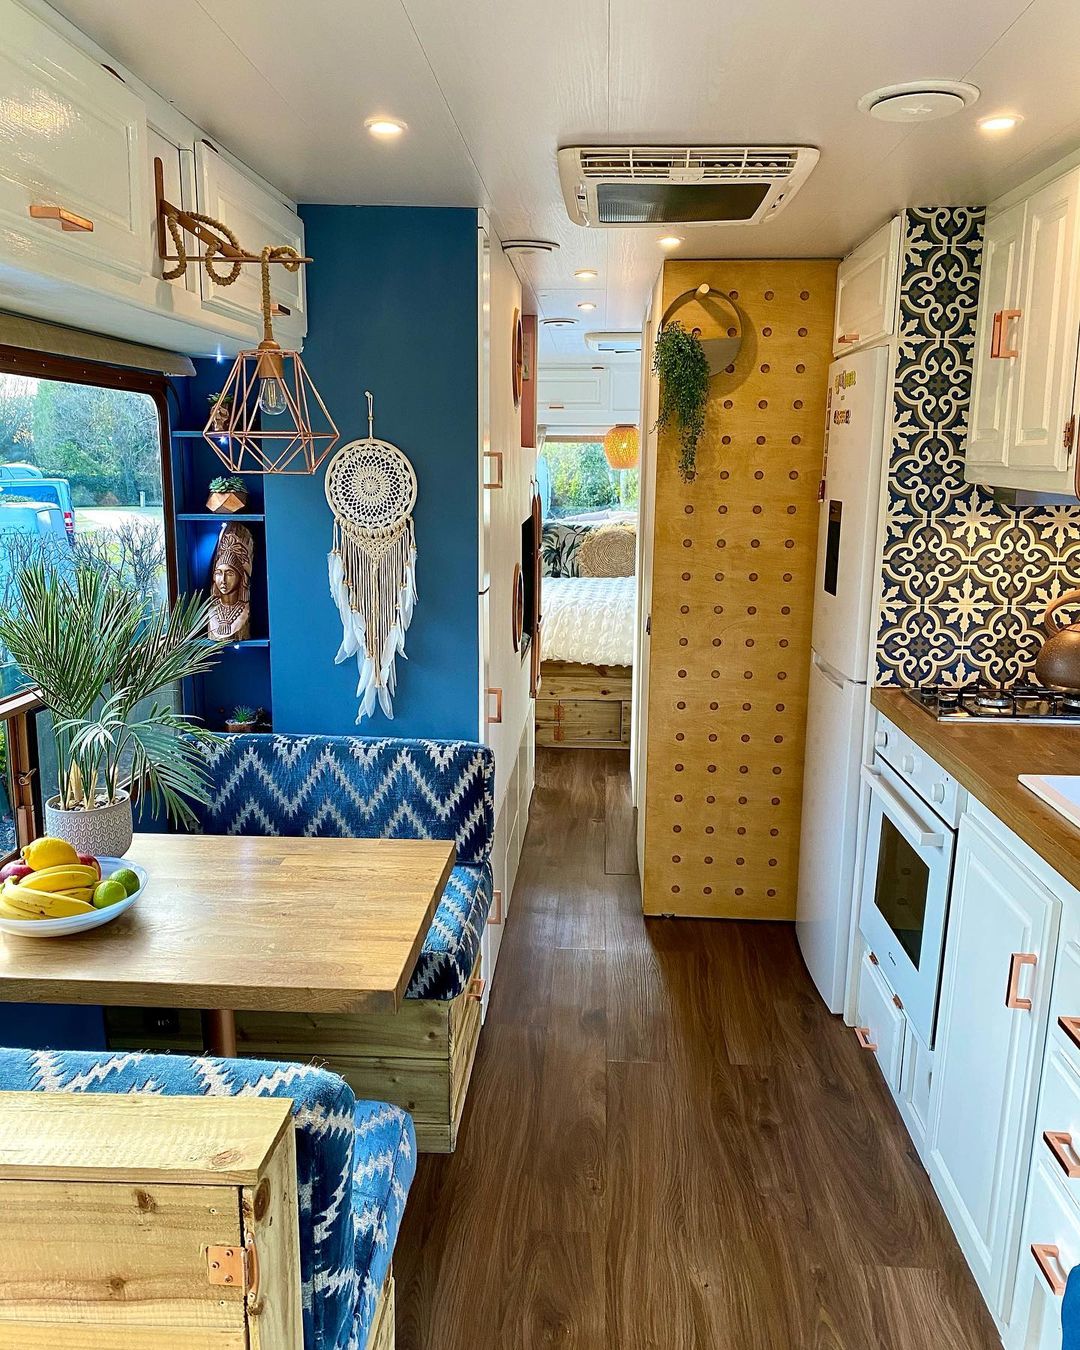 RV interior painted with bright blue walls, chevron patterned cushions, and boho accents